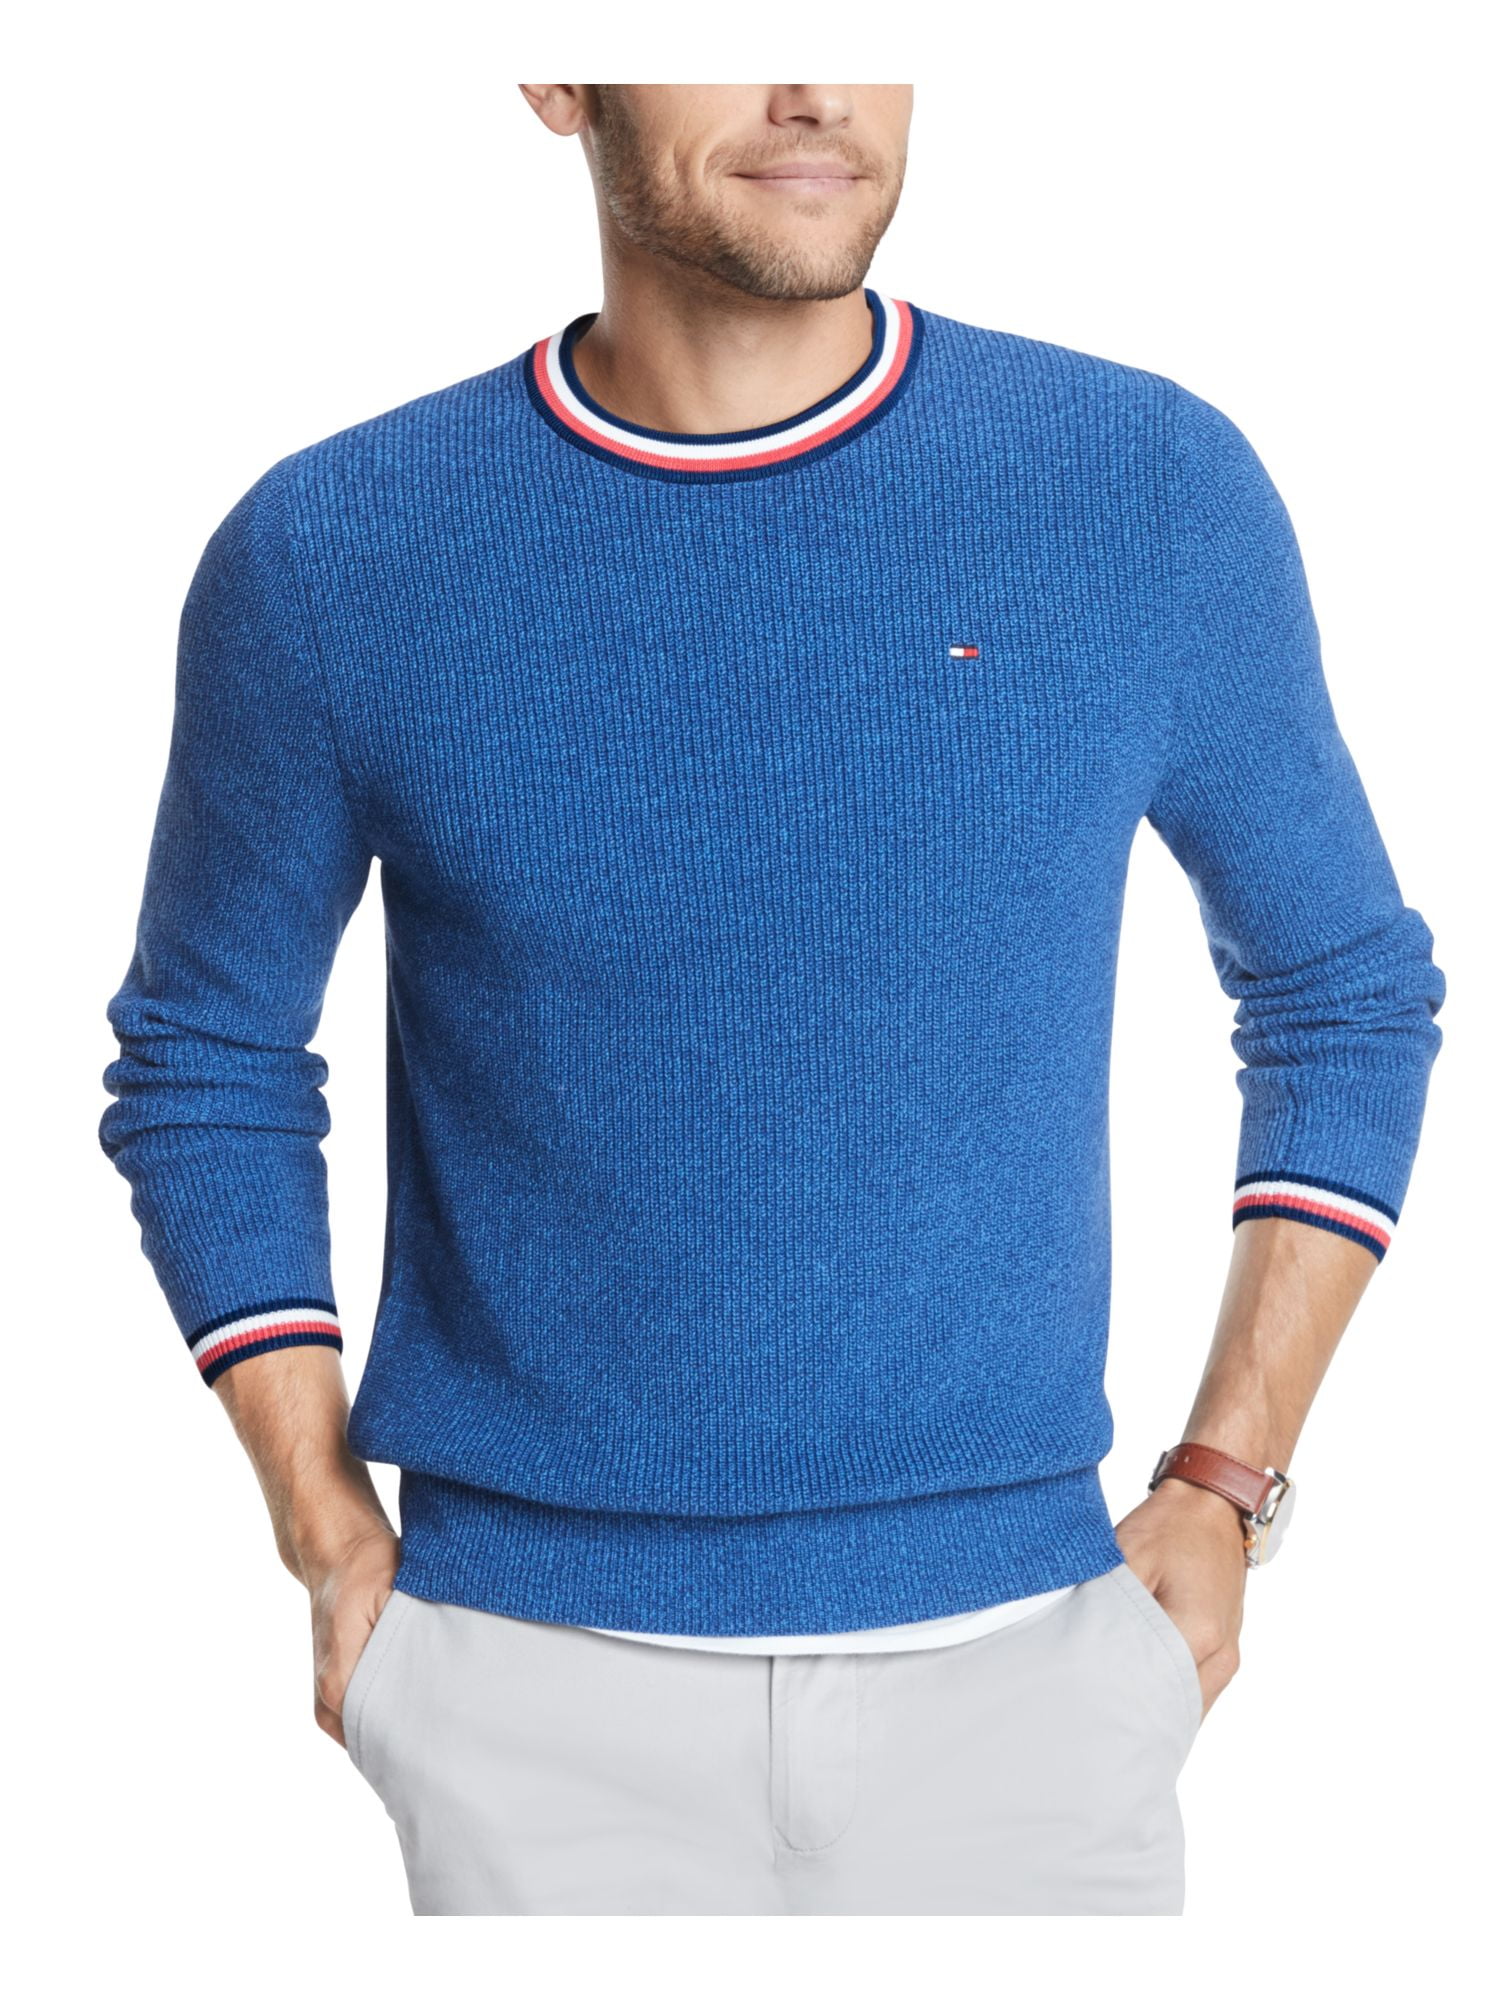 TOMMY HILFIGER Mens Blue Long Sleeve Crew Neck Classic Fit Knit Pullover  Sweater XXL